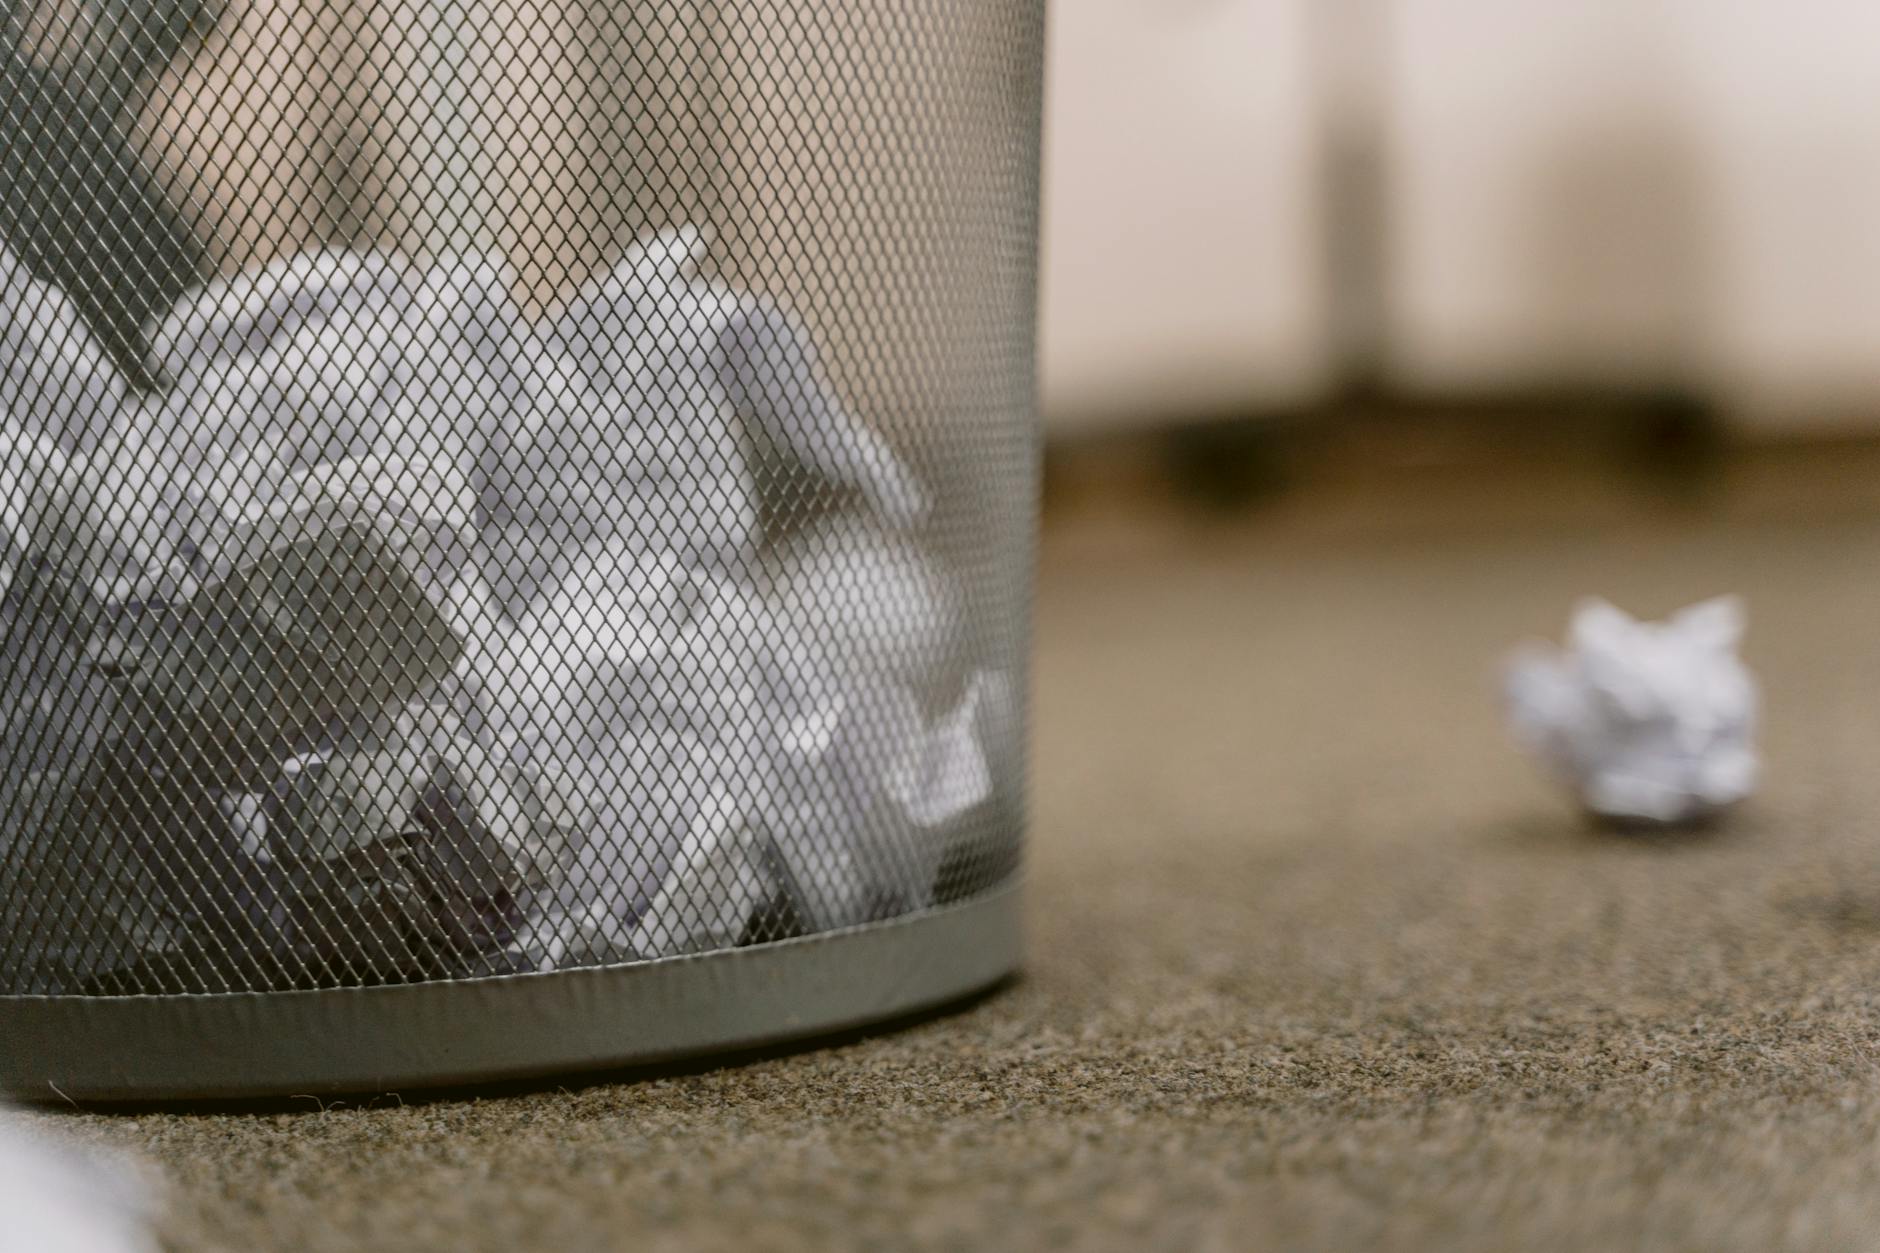 crumpled papers in a mesh trash can